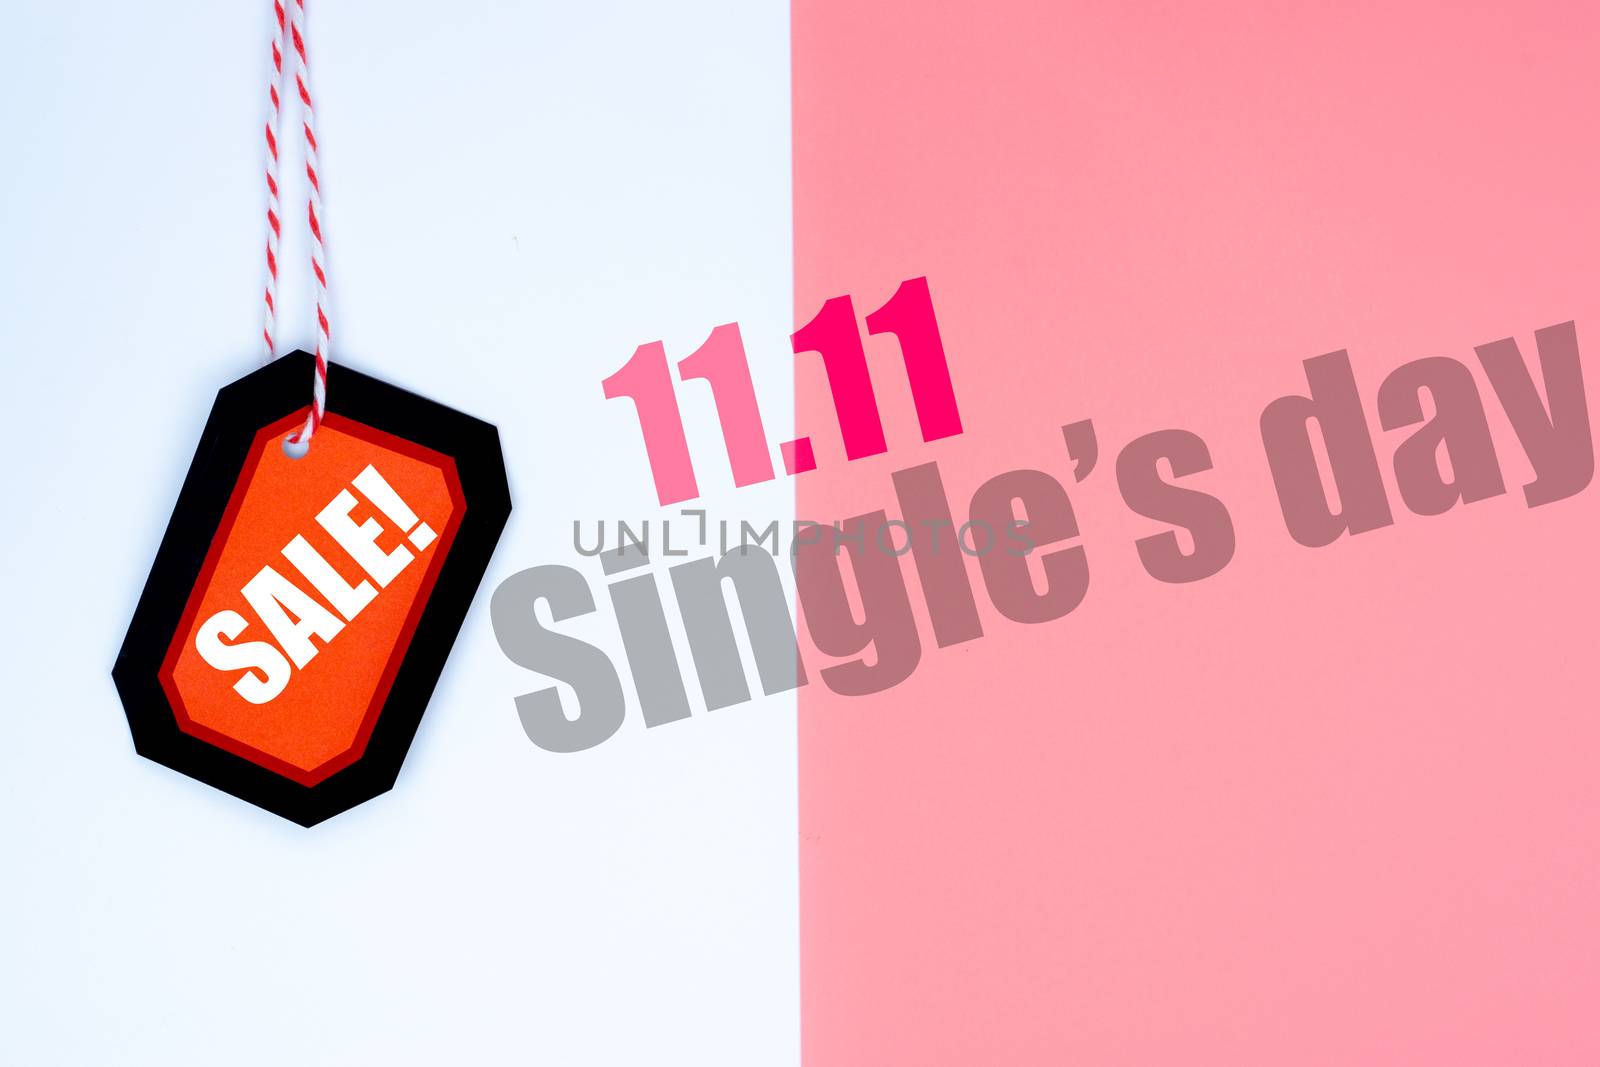 Online shopping of China, The red and black shopping tag with red rope on a white and pink background with copy space for text. 11.11 single's day sale concept